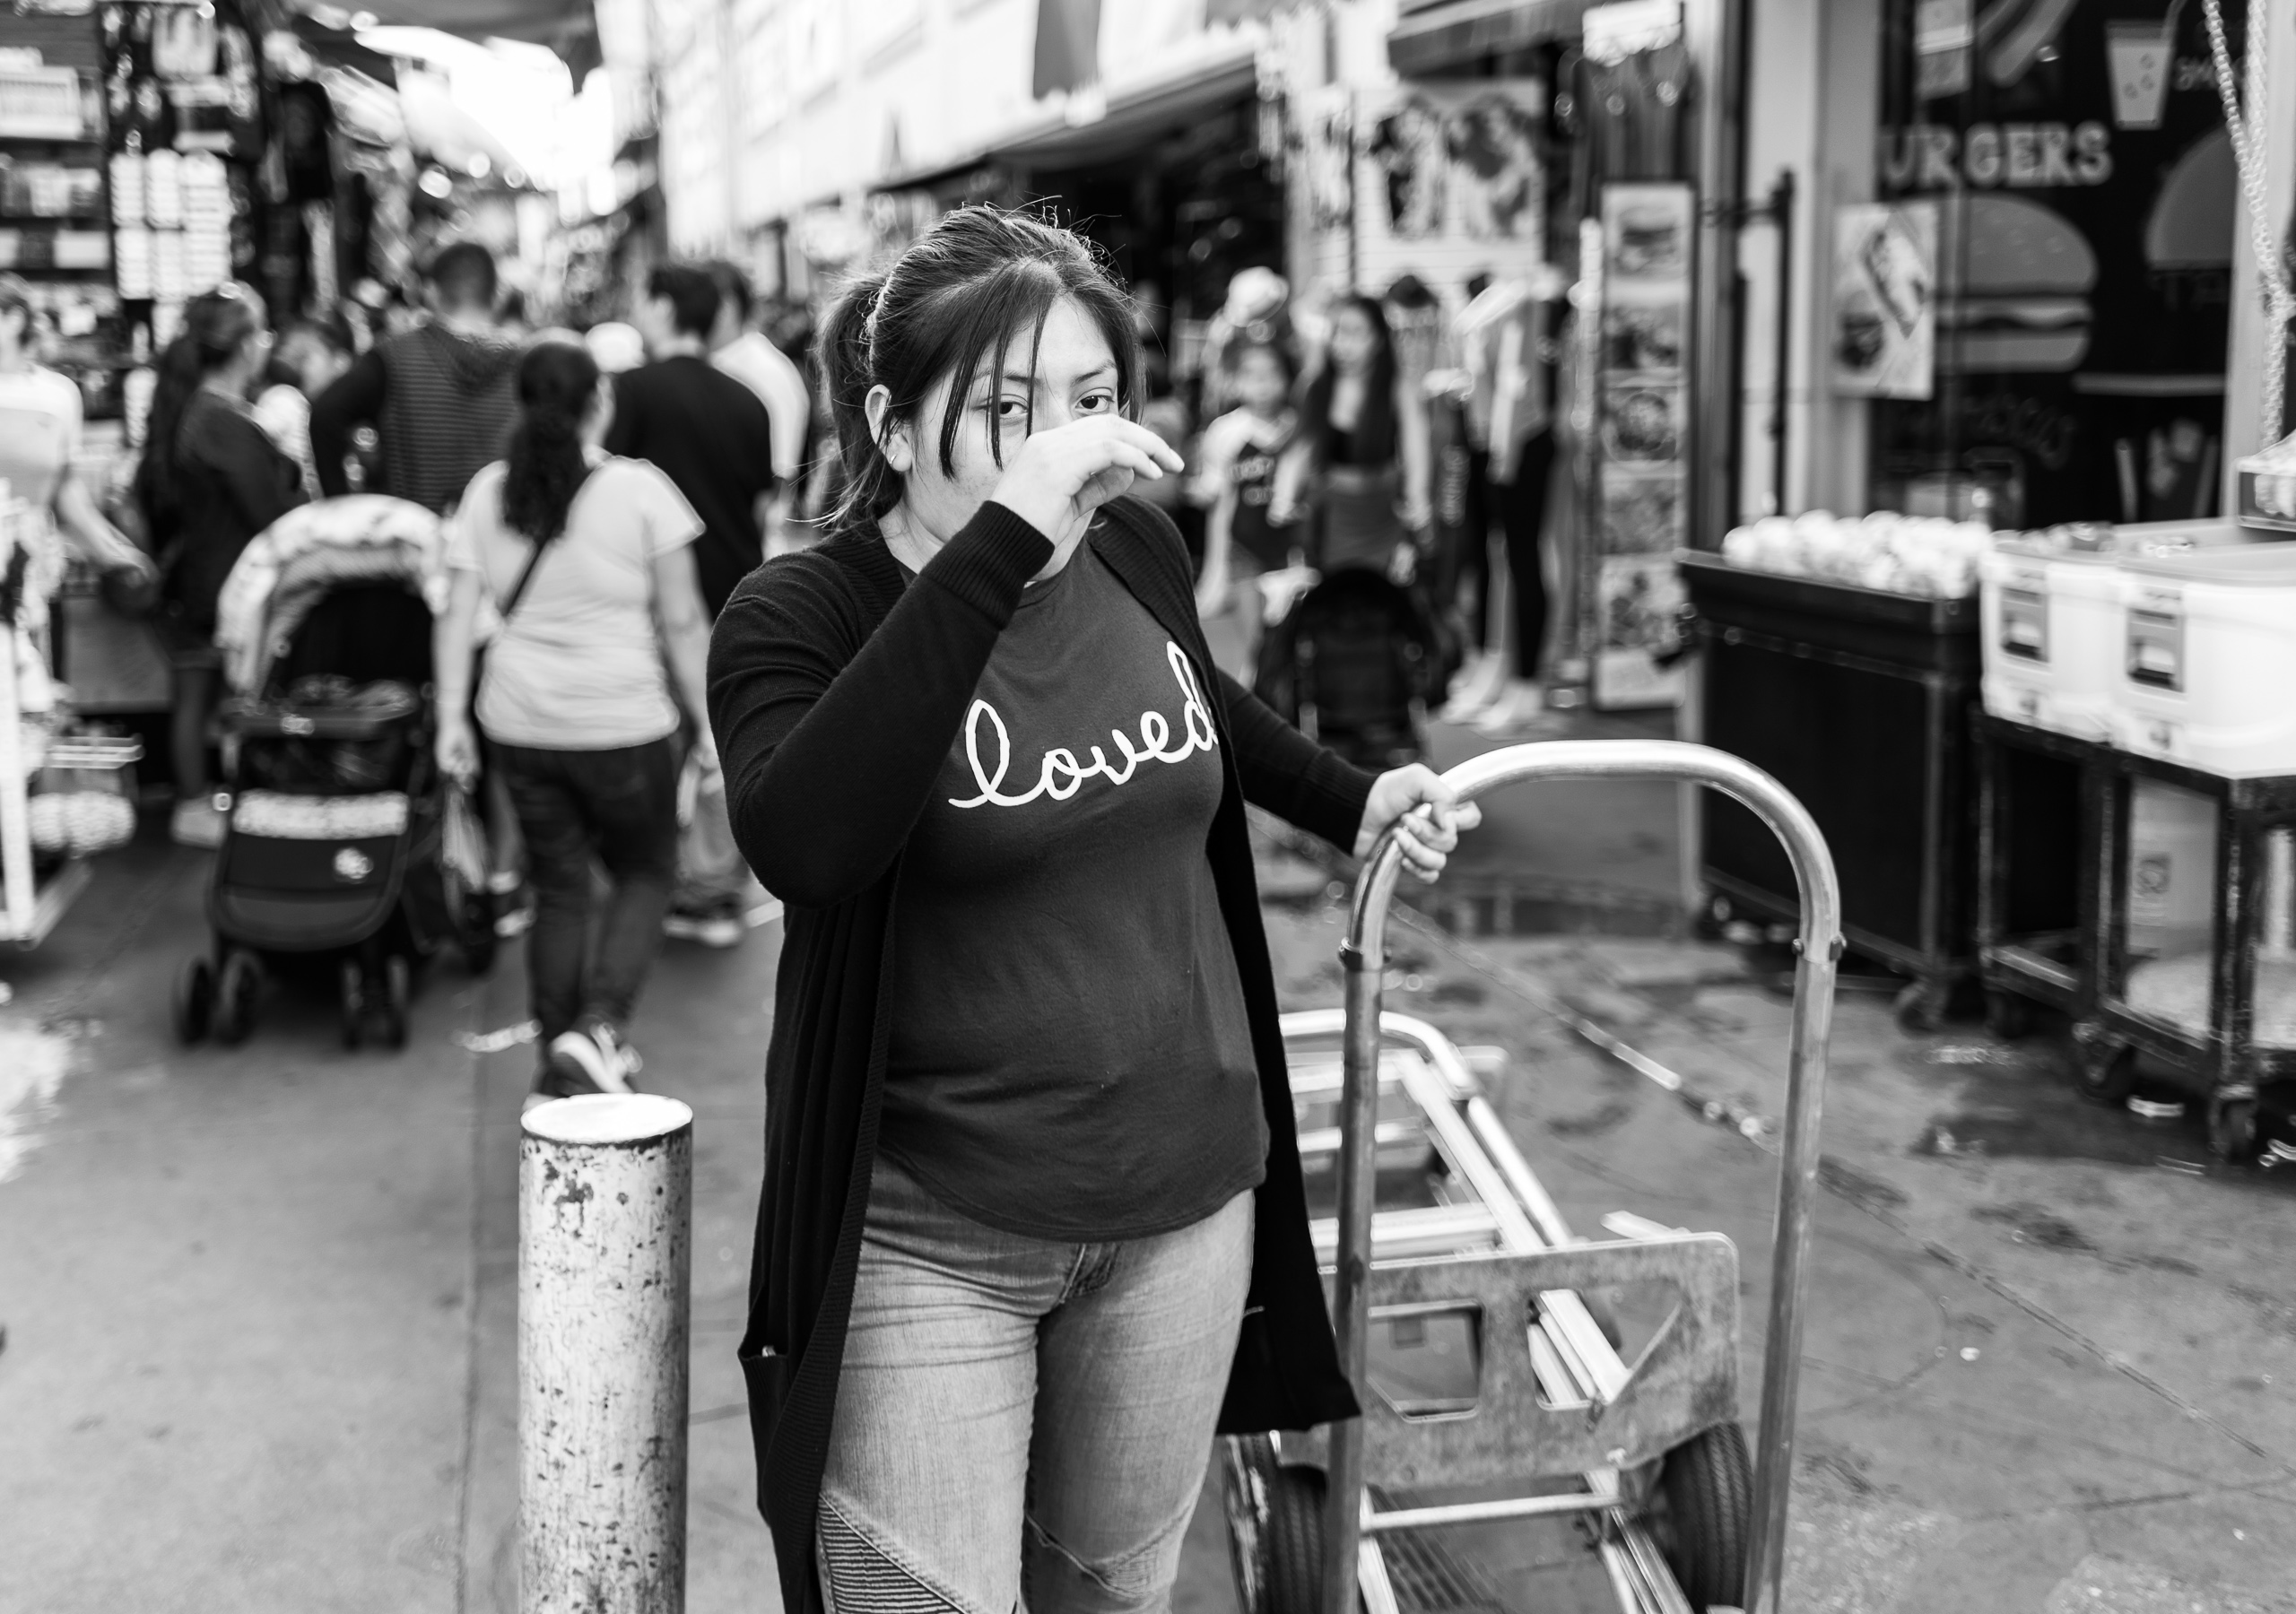 a woman wheeling a dolly and wearing a "loved" t-shirt in Santee Alley, Garment District, Los Angeles, CA